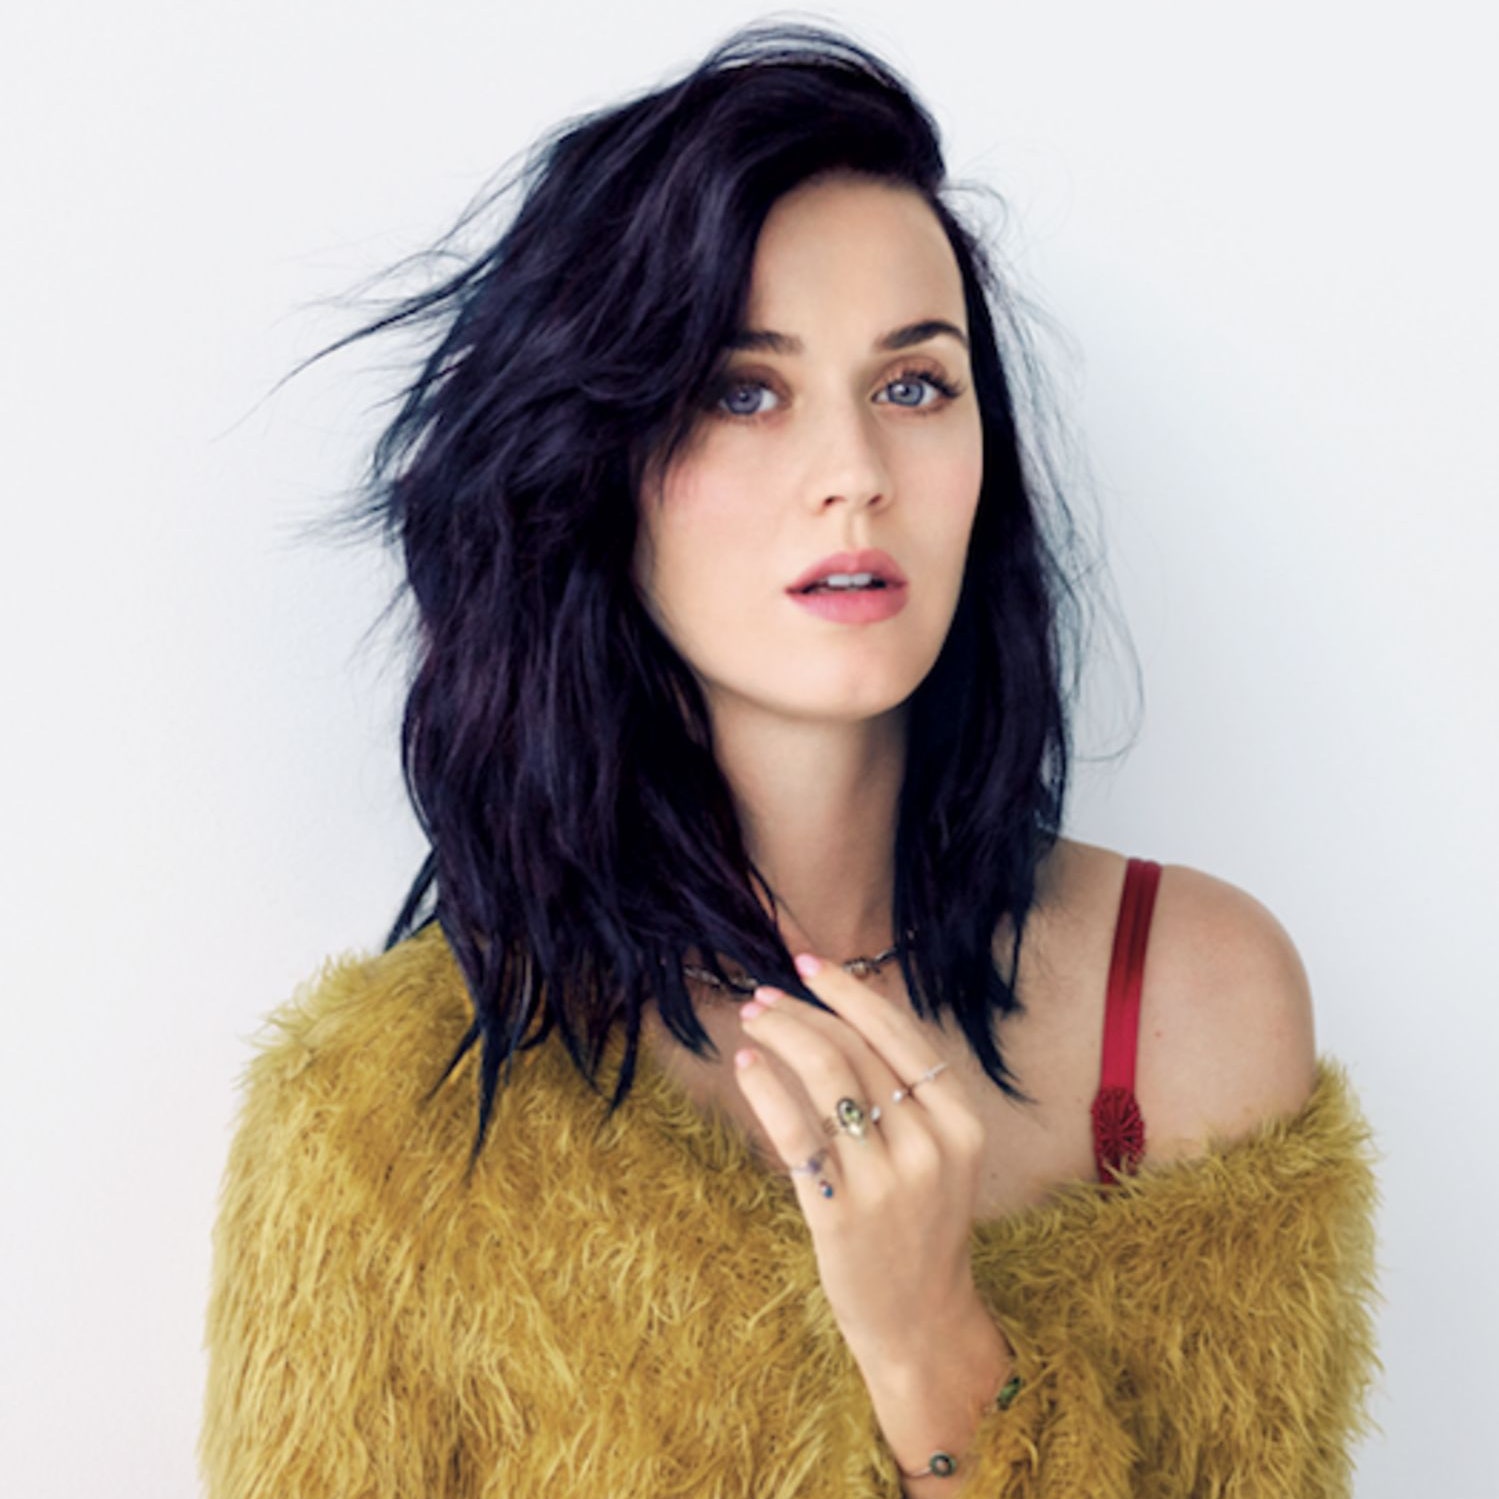 Katy Perry Small Talk Portrait Wallpapers